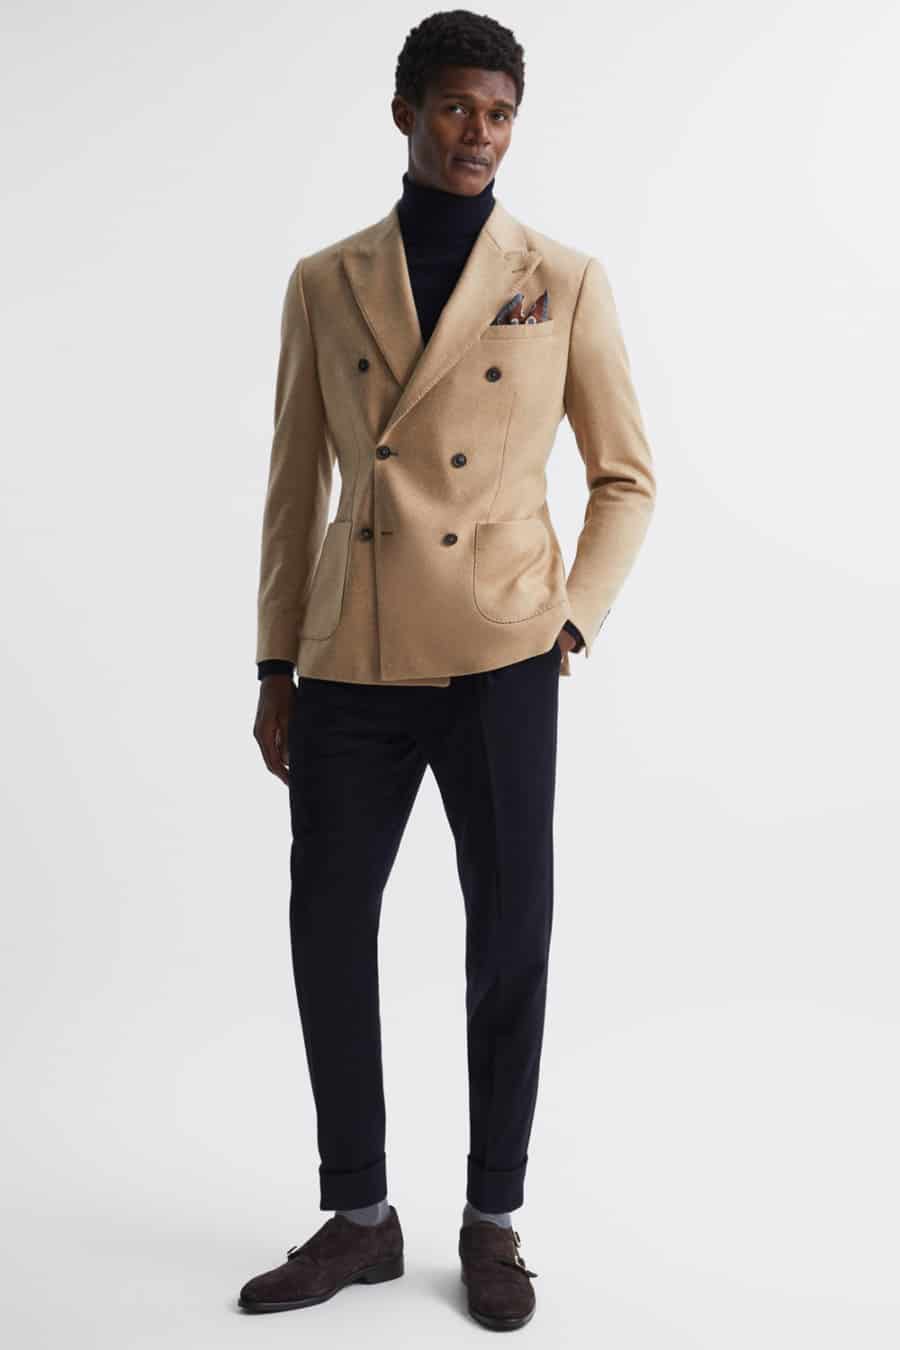 Men's black trousers, black roll neck, camel double breasted blazer and brown monk strap shoes outfit